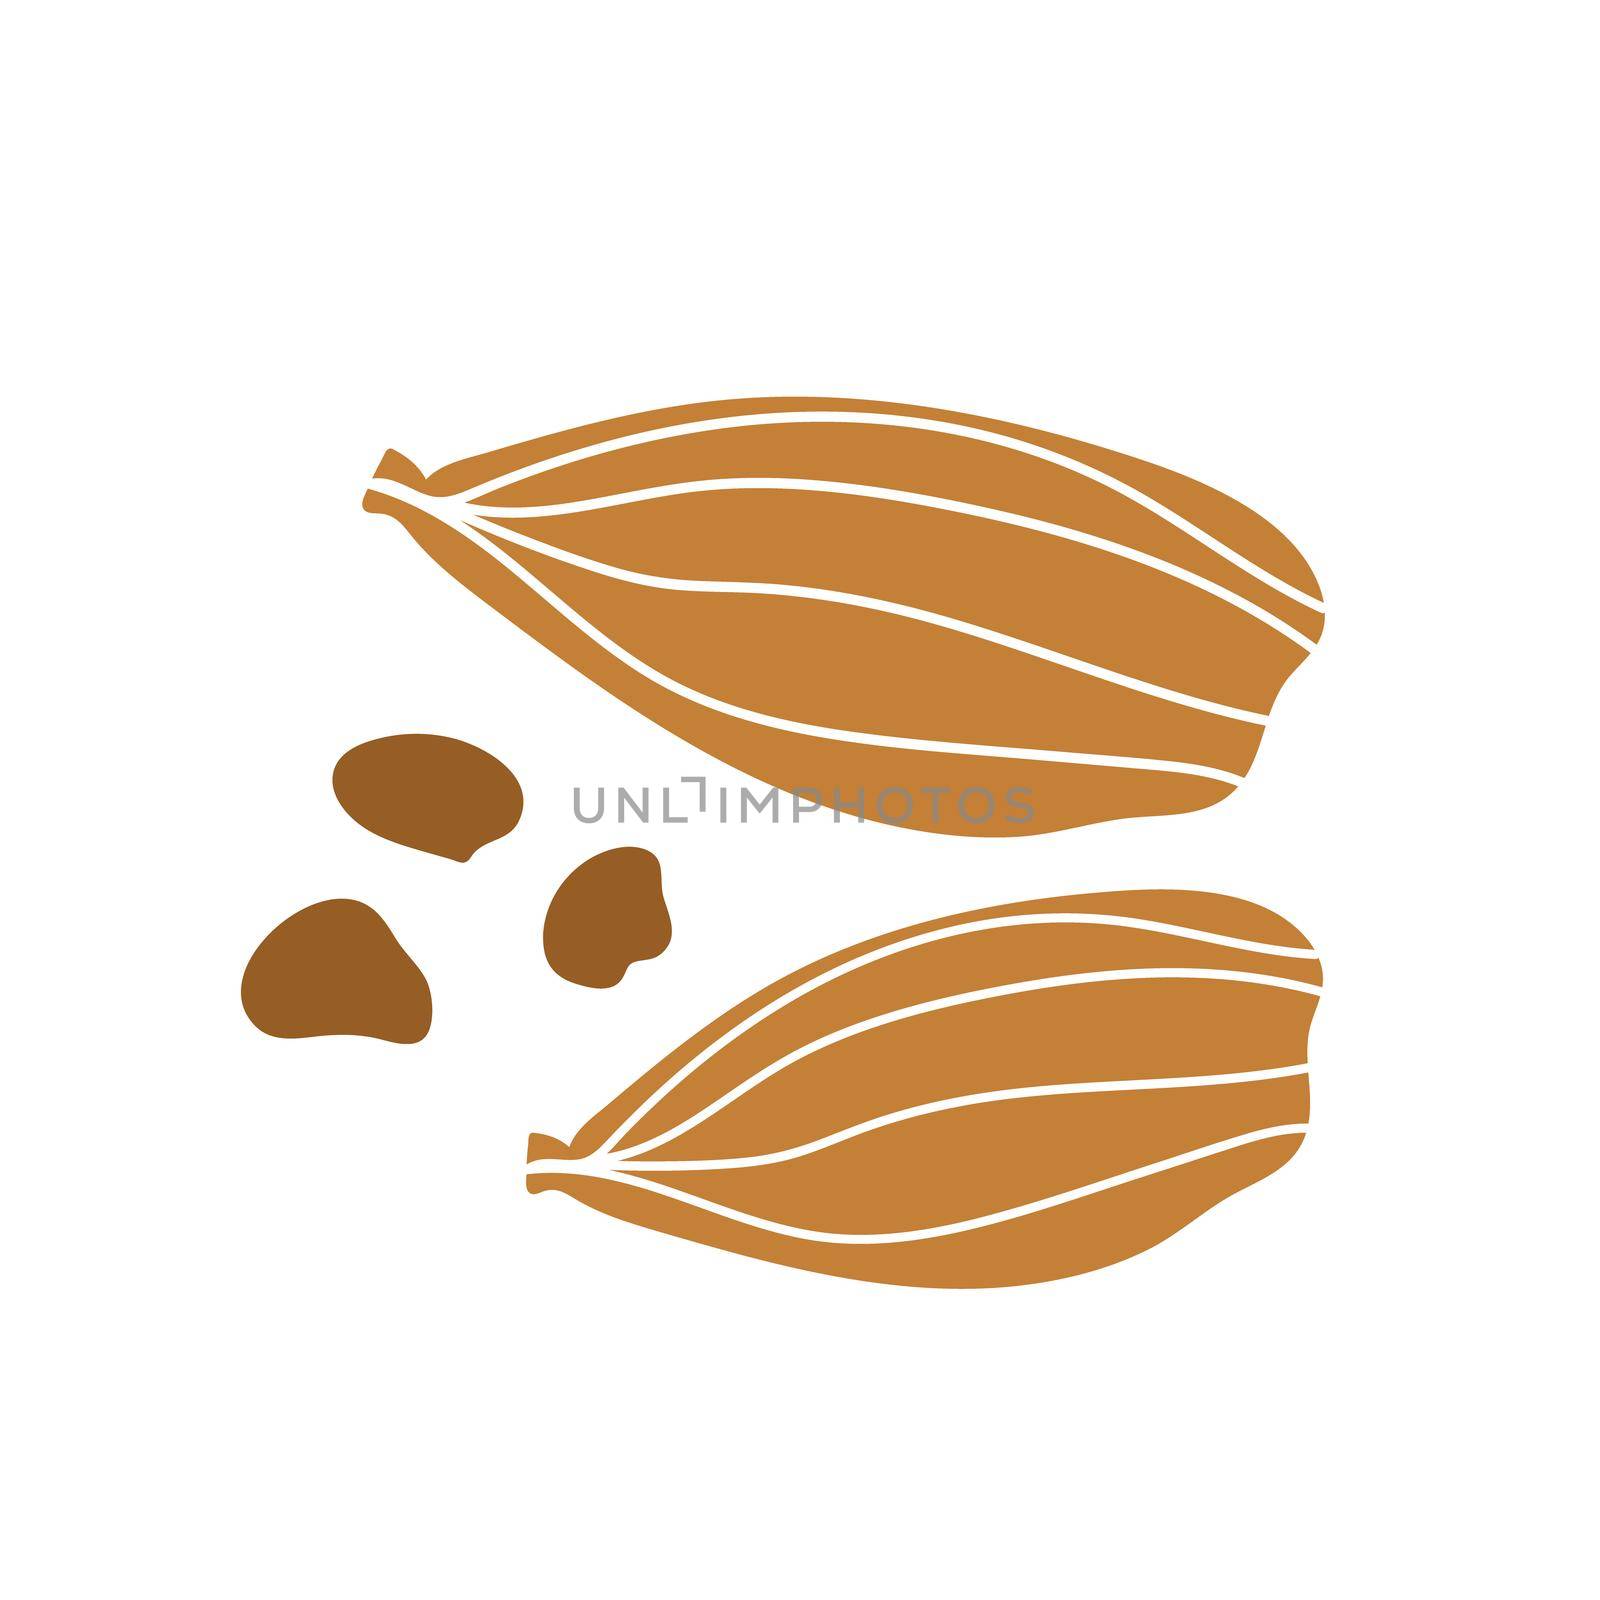 Cardamom icon. Botanical hand drawn icon for labels and packages in simple style. Cooking symbol for menu. Vector single isolated element